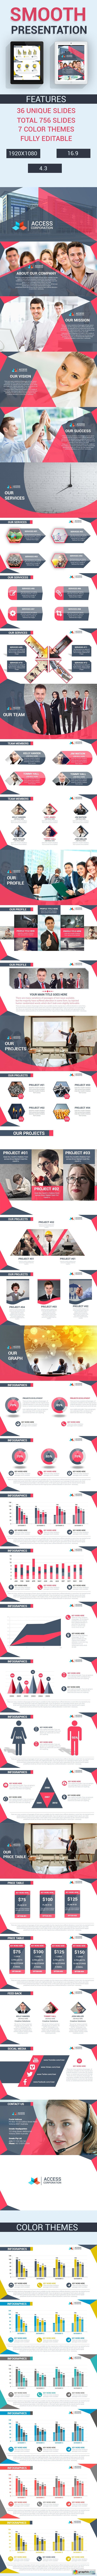 Smooth PowerPoint Presentation Template 11365652